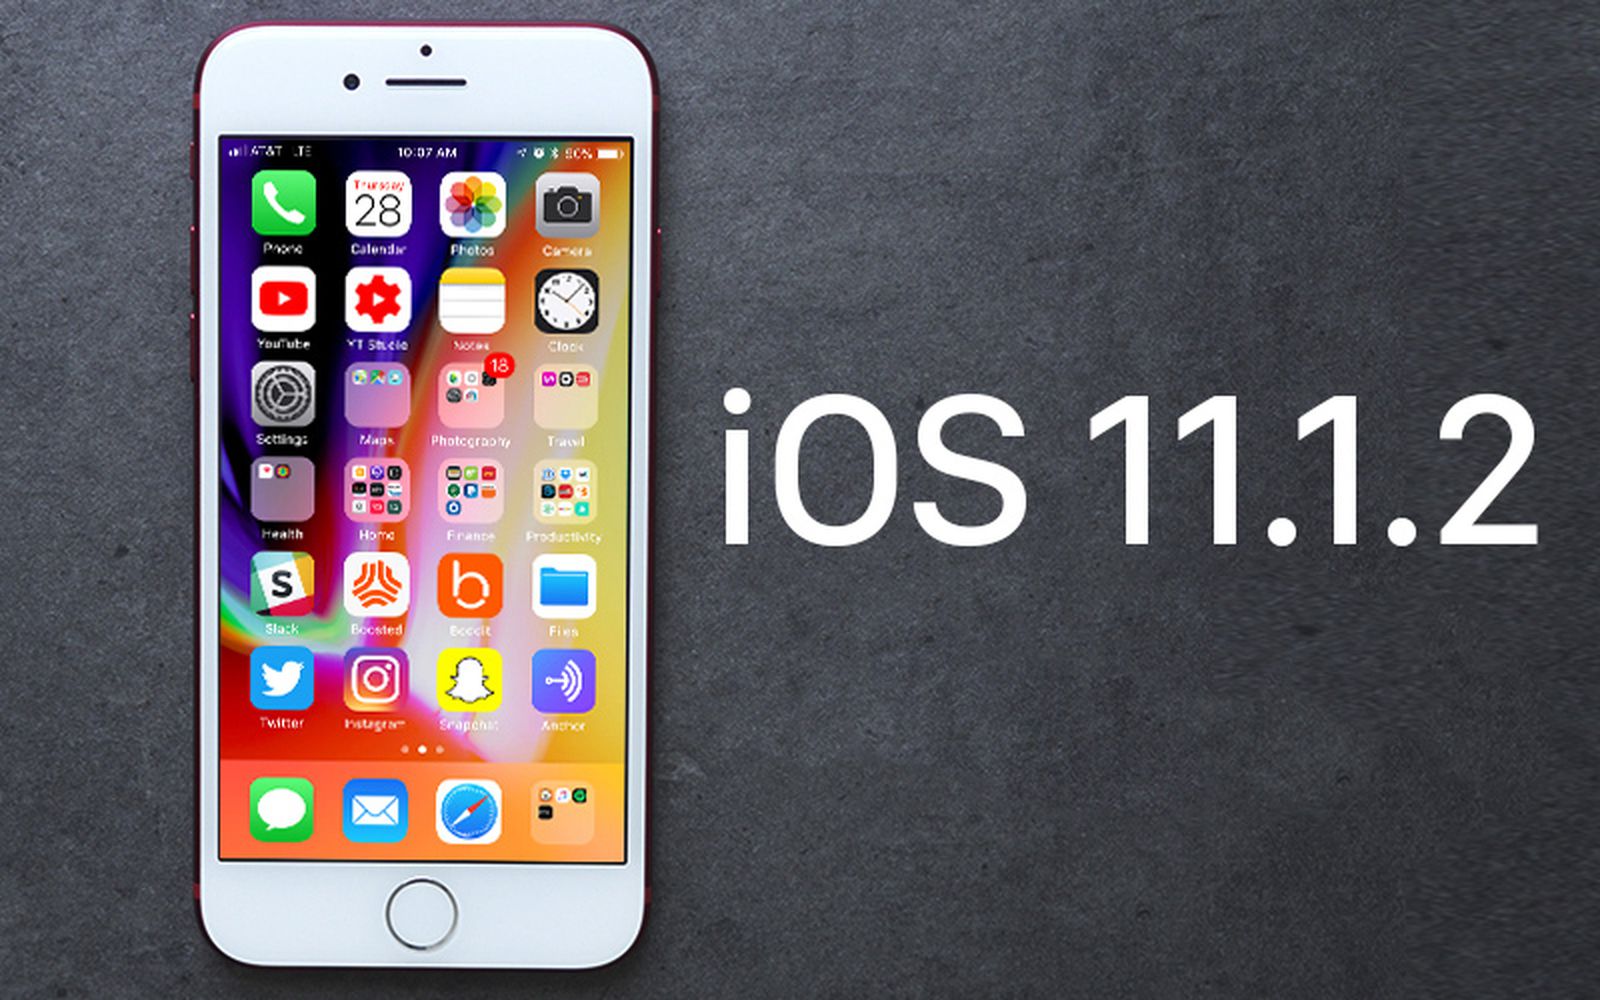 Apple Releases iOS 11.1.2 With Fix for Unresponsive iPhone X Display in